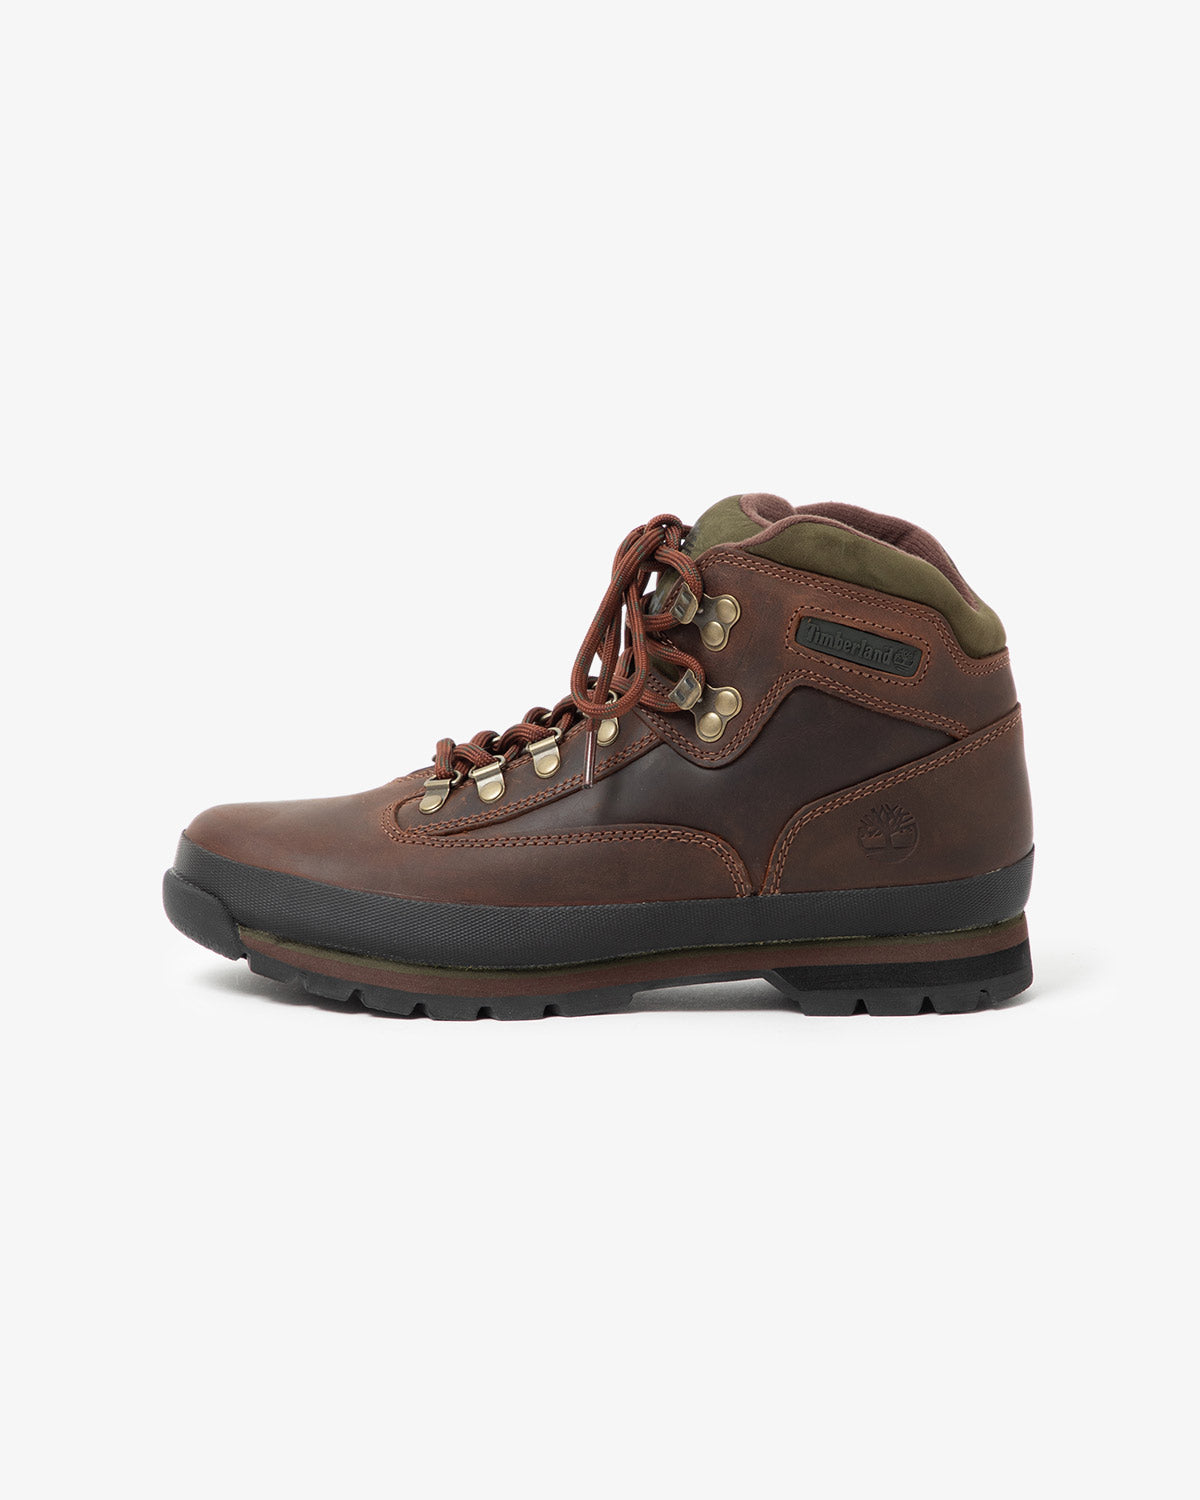 EURO HIKER LEATHER